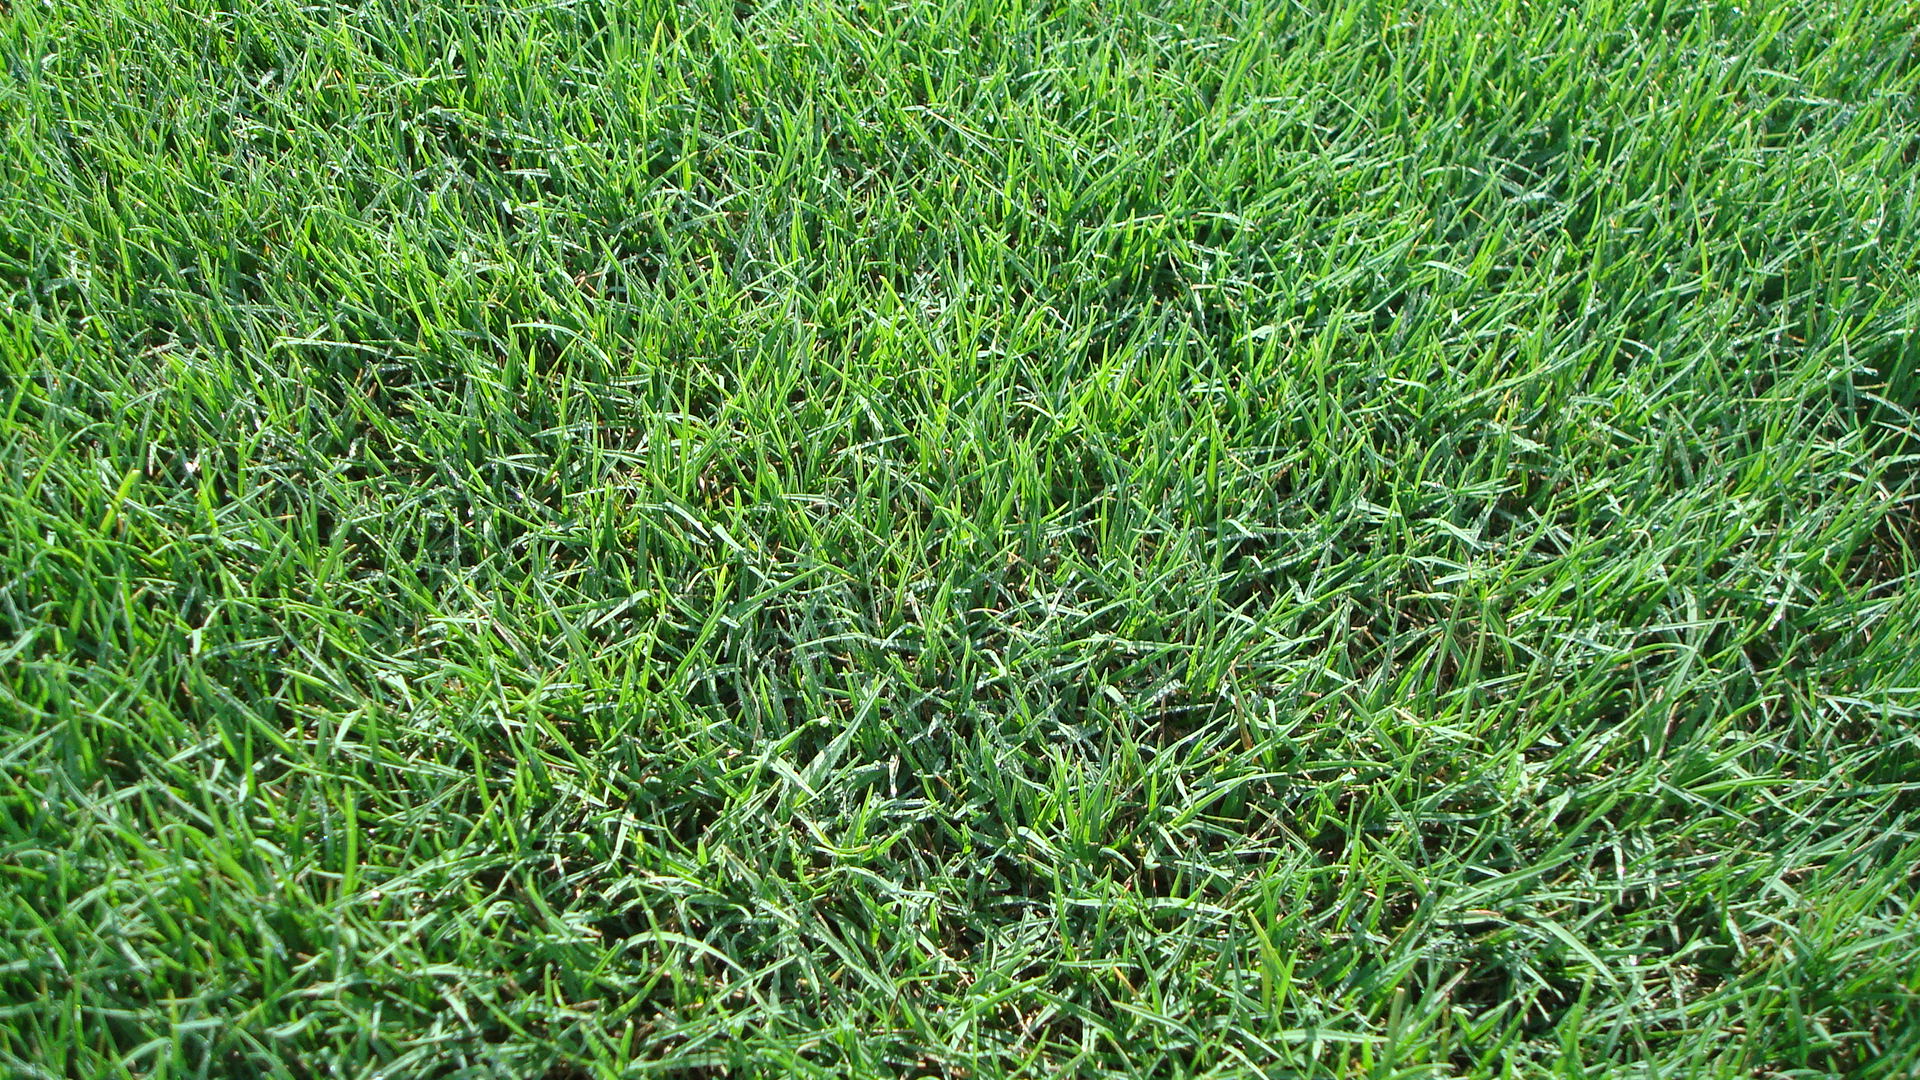 Tifway-419-Bermuda-sod-turf-grass-delivery-prices